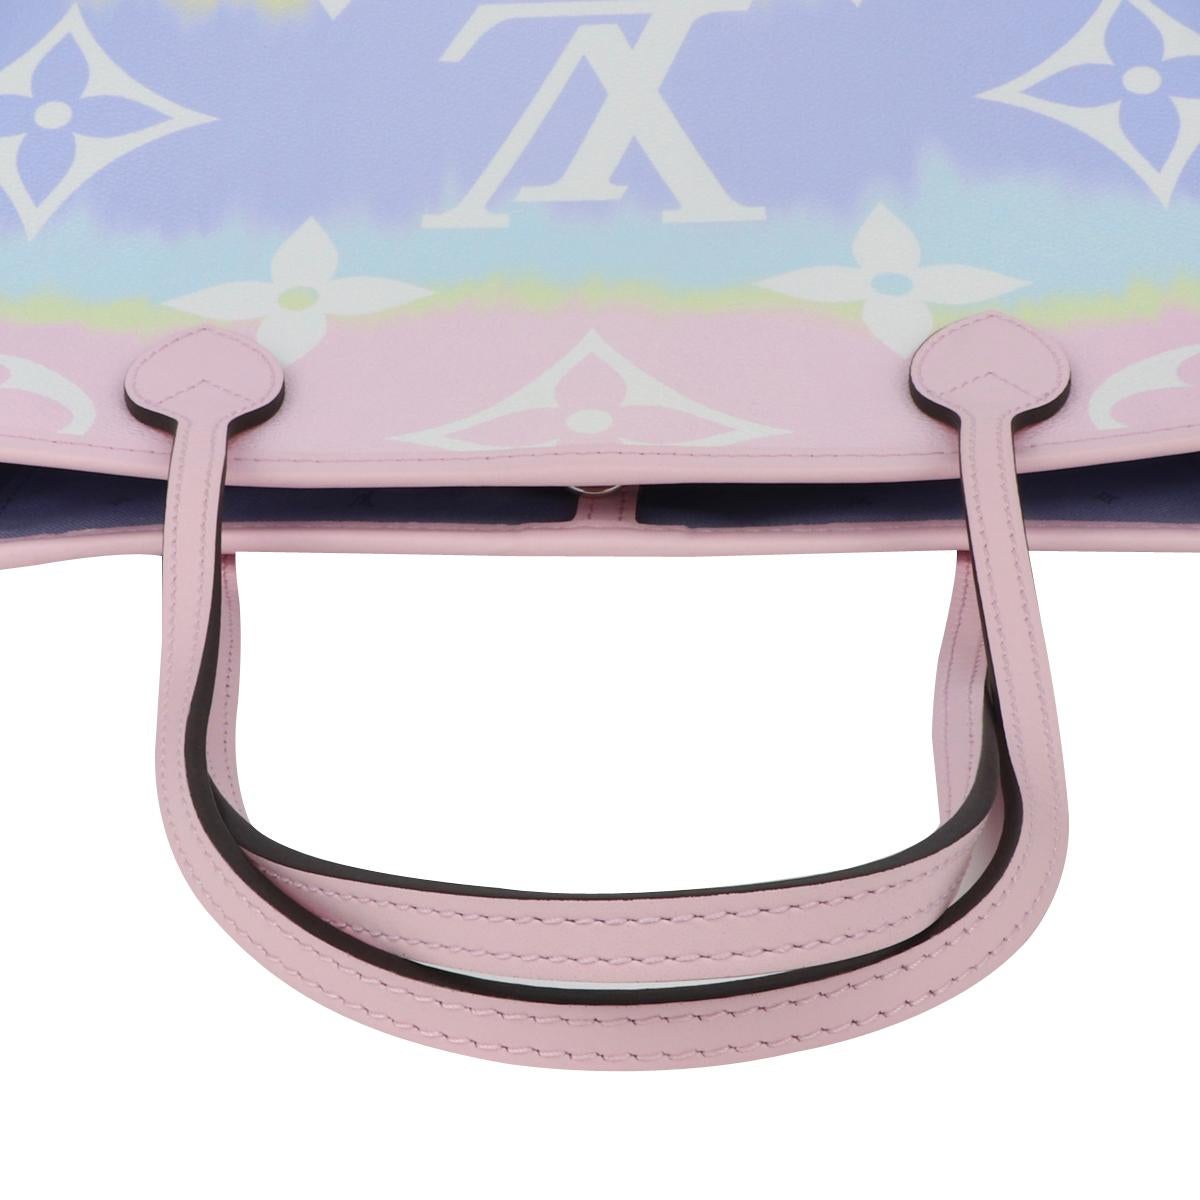 Louis Vuitton Escale Neverfull MM Bag in Pastel 2020 Limited Edition For Sale 3